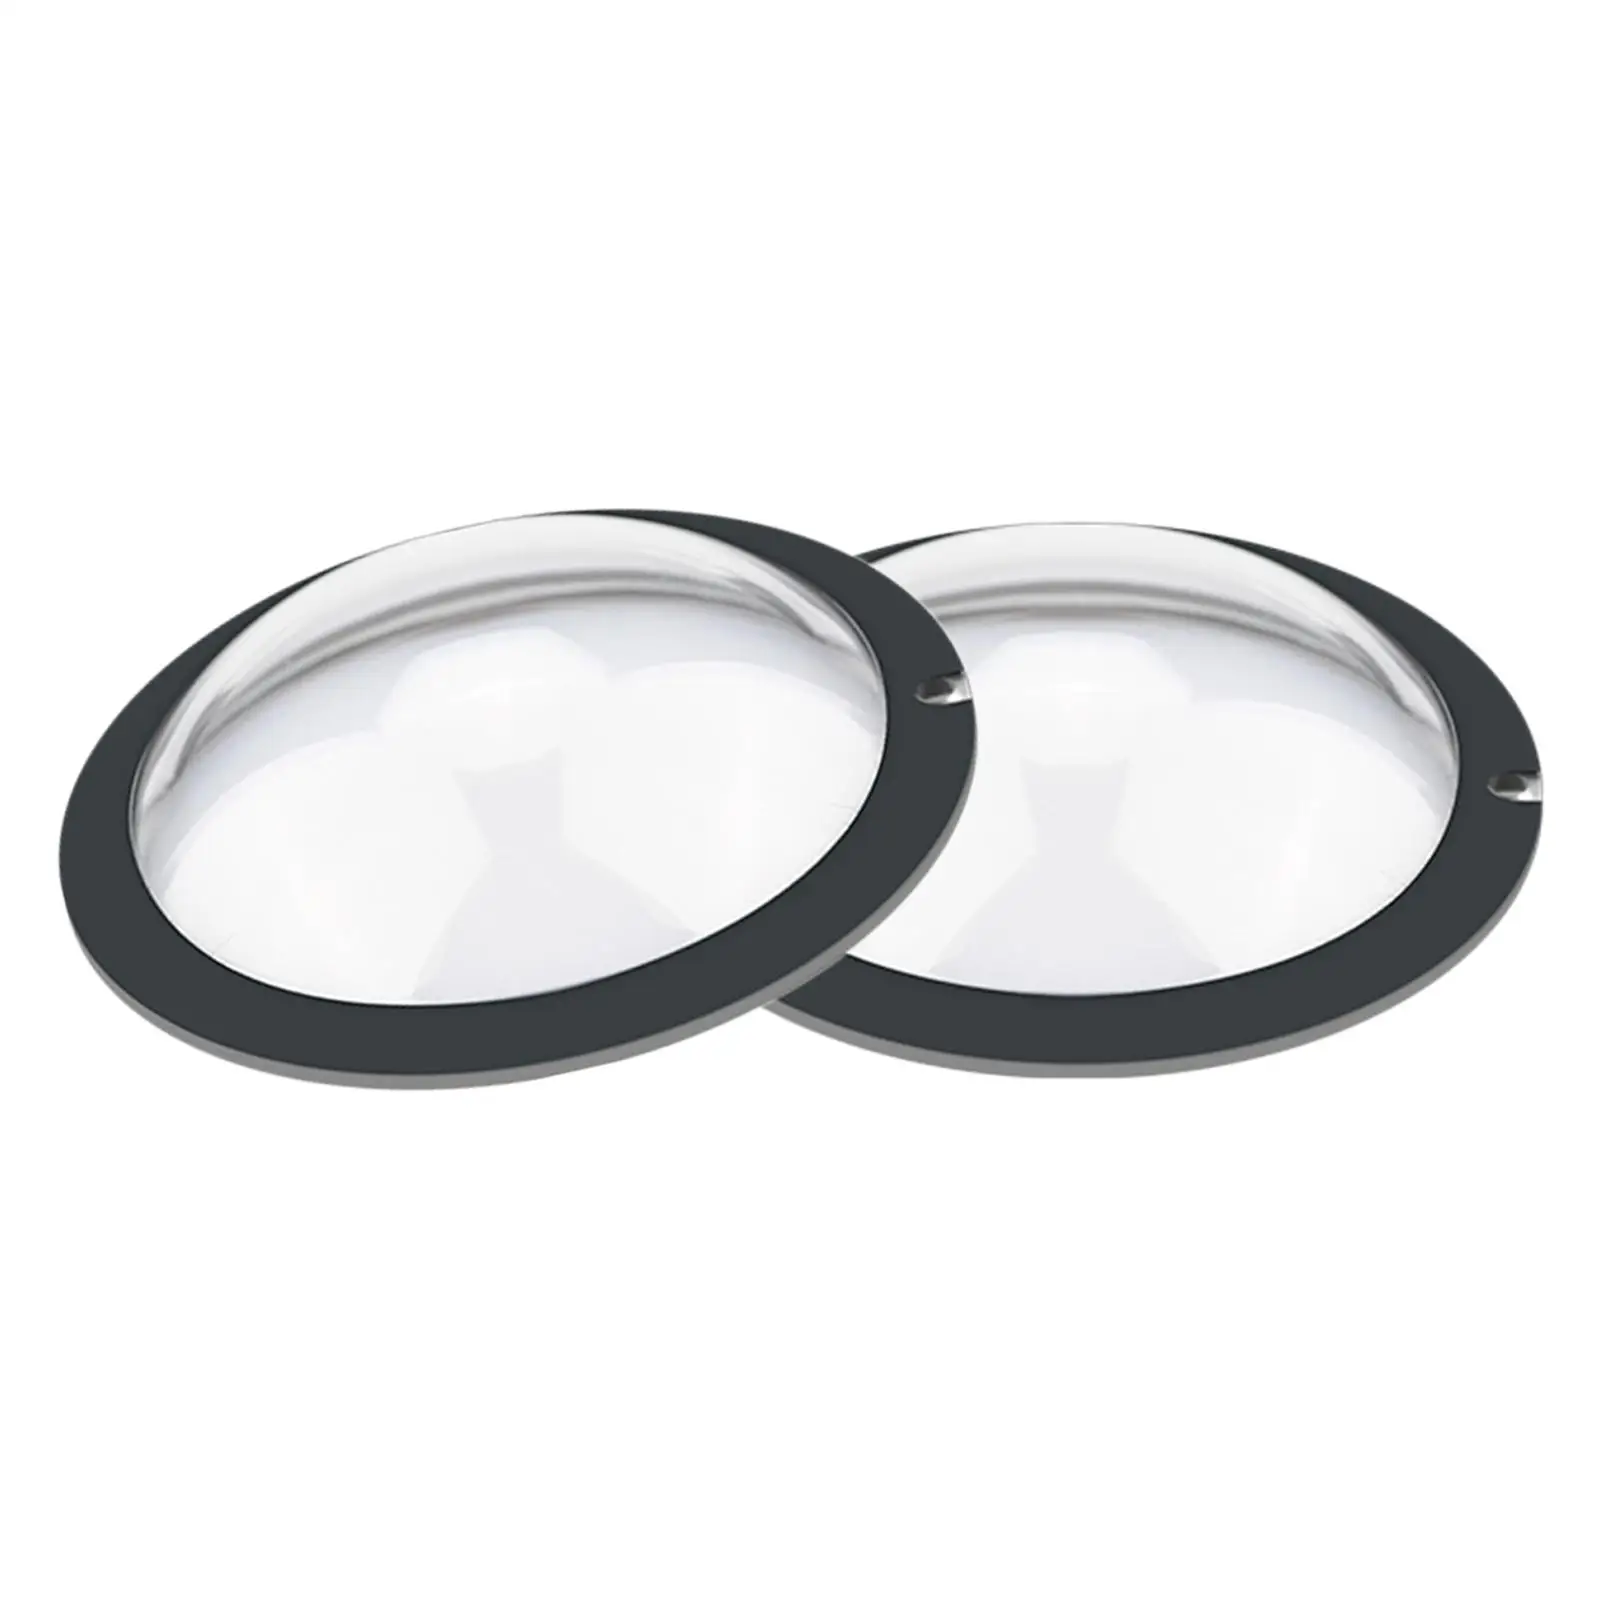 2x Lens Guard with Double-sided Adhesives for  ONE X2 Action